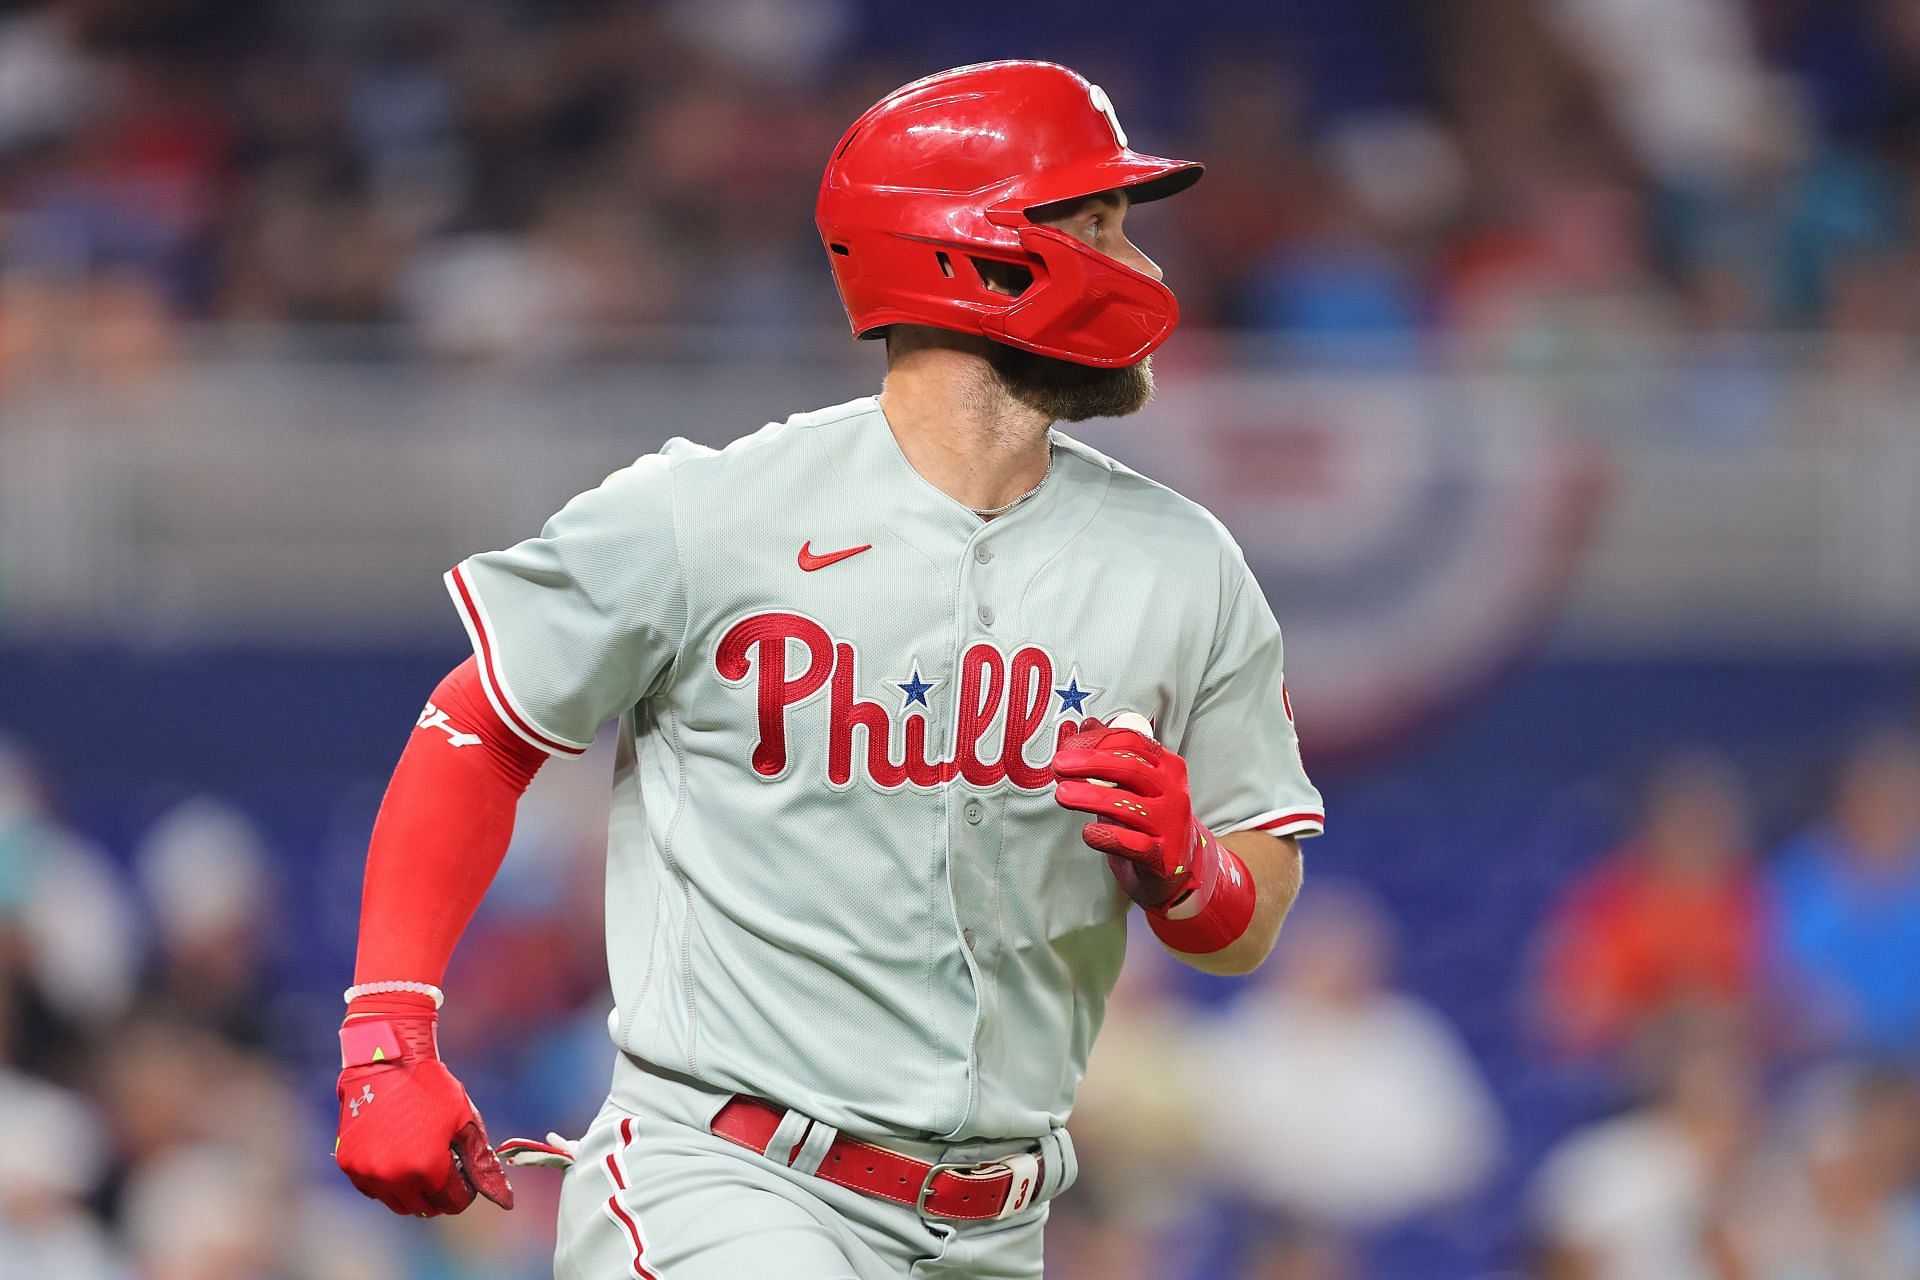 Phillies slugger Bryce Harper will get back to the outfield this week